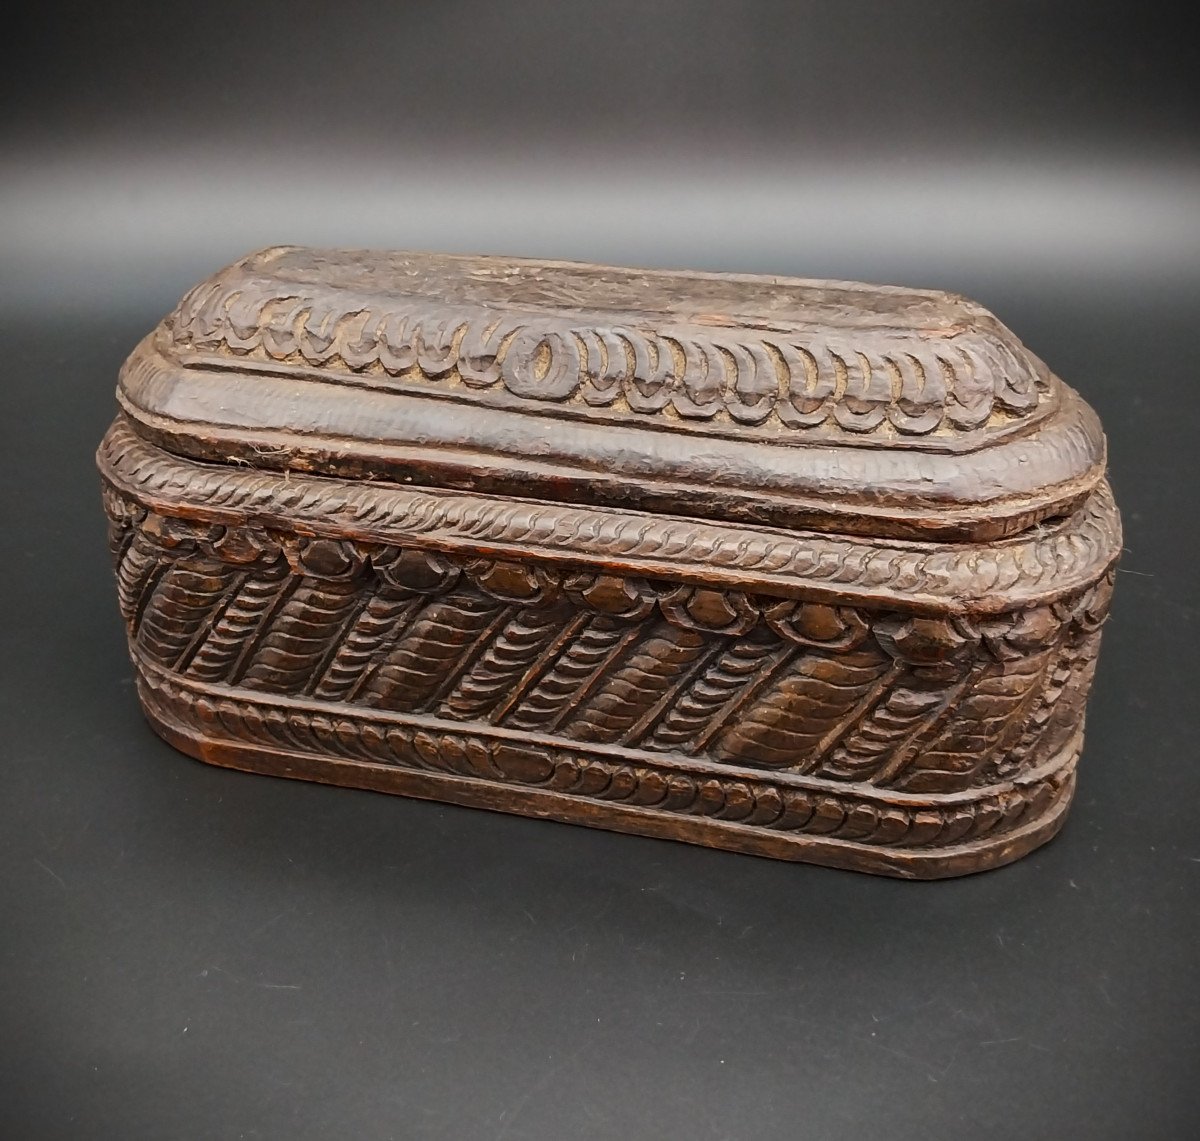 Hand-carved Wooden Box From The 18th Century